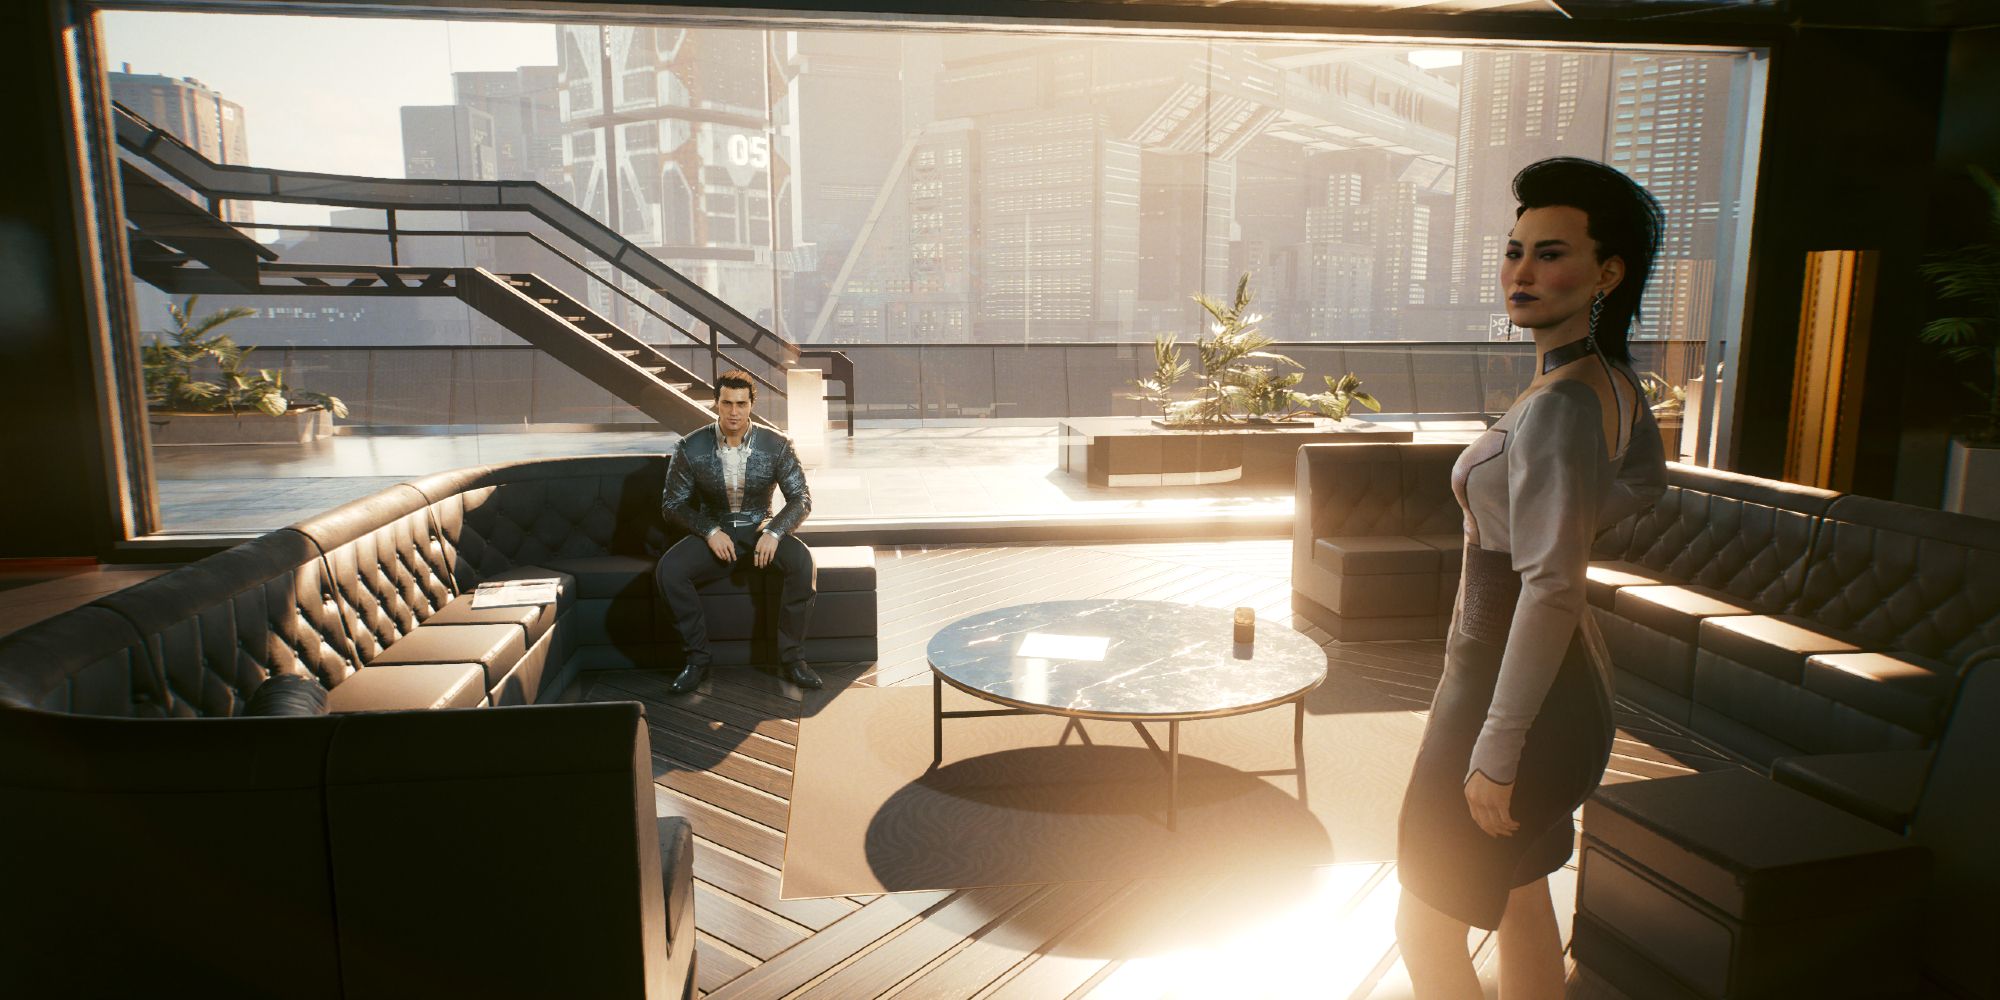 Jefferson and Elizabeth Peralez receiving your at their home in Cyberpunk 2077.